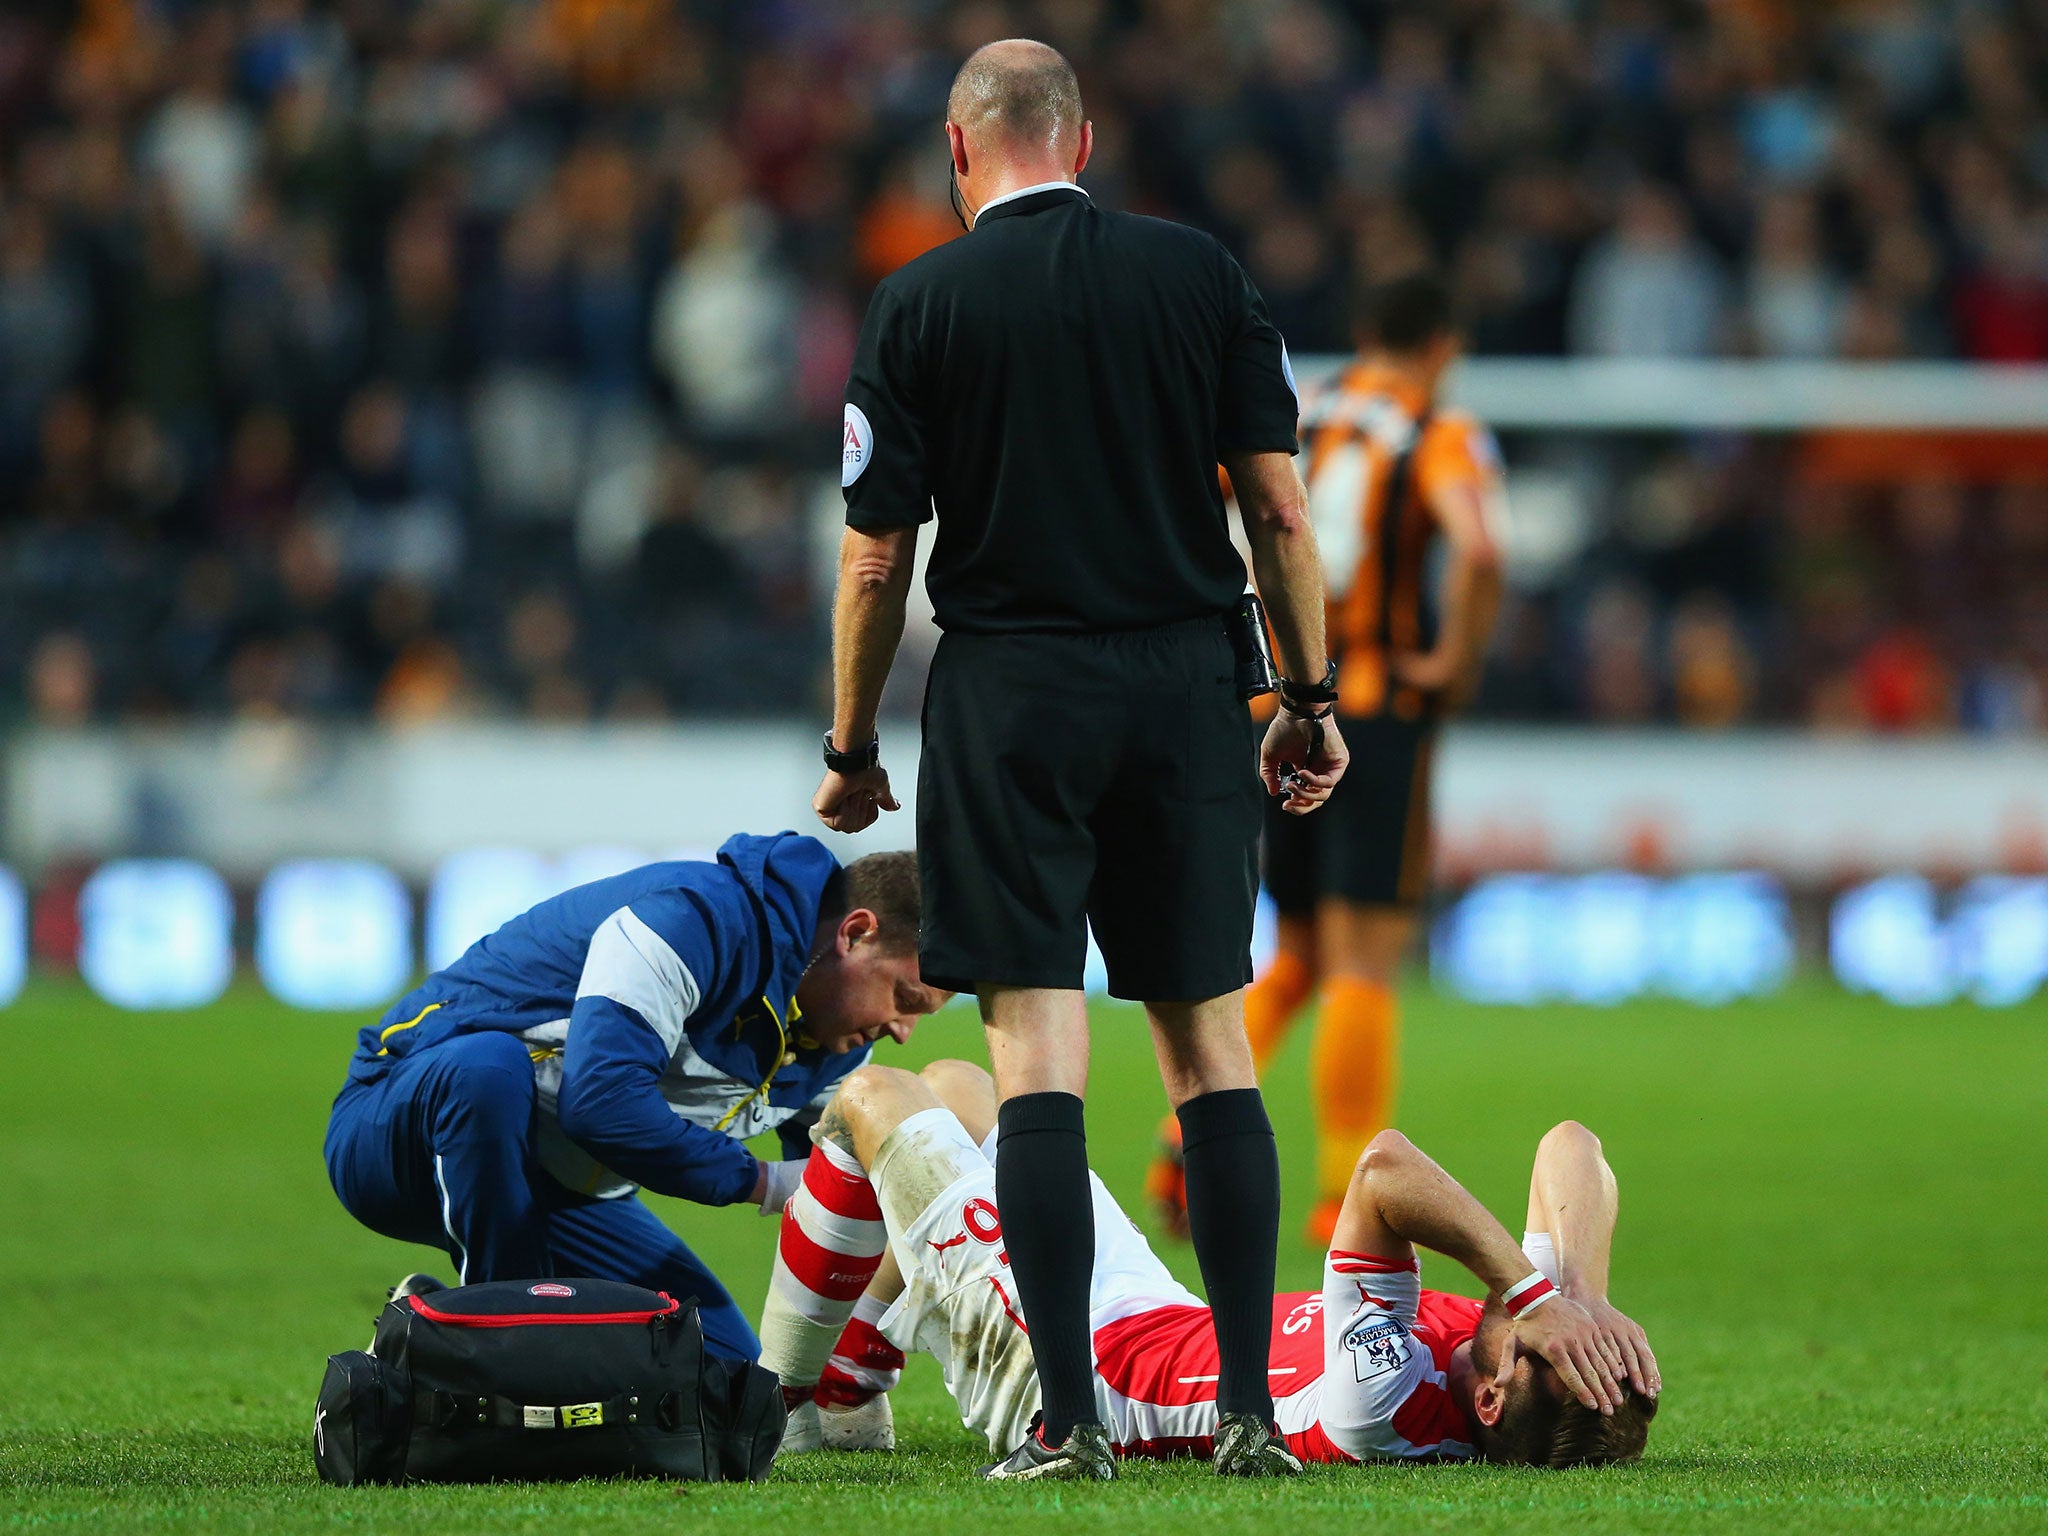 Aaron Ramsey receives treatment after being kicked on the leg